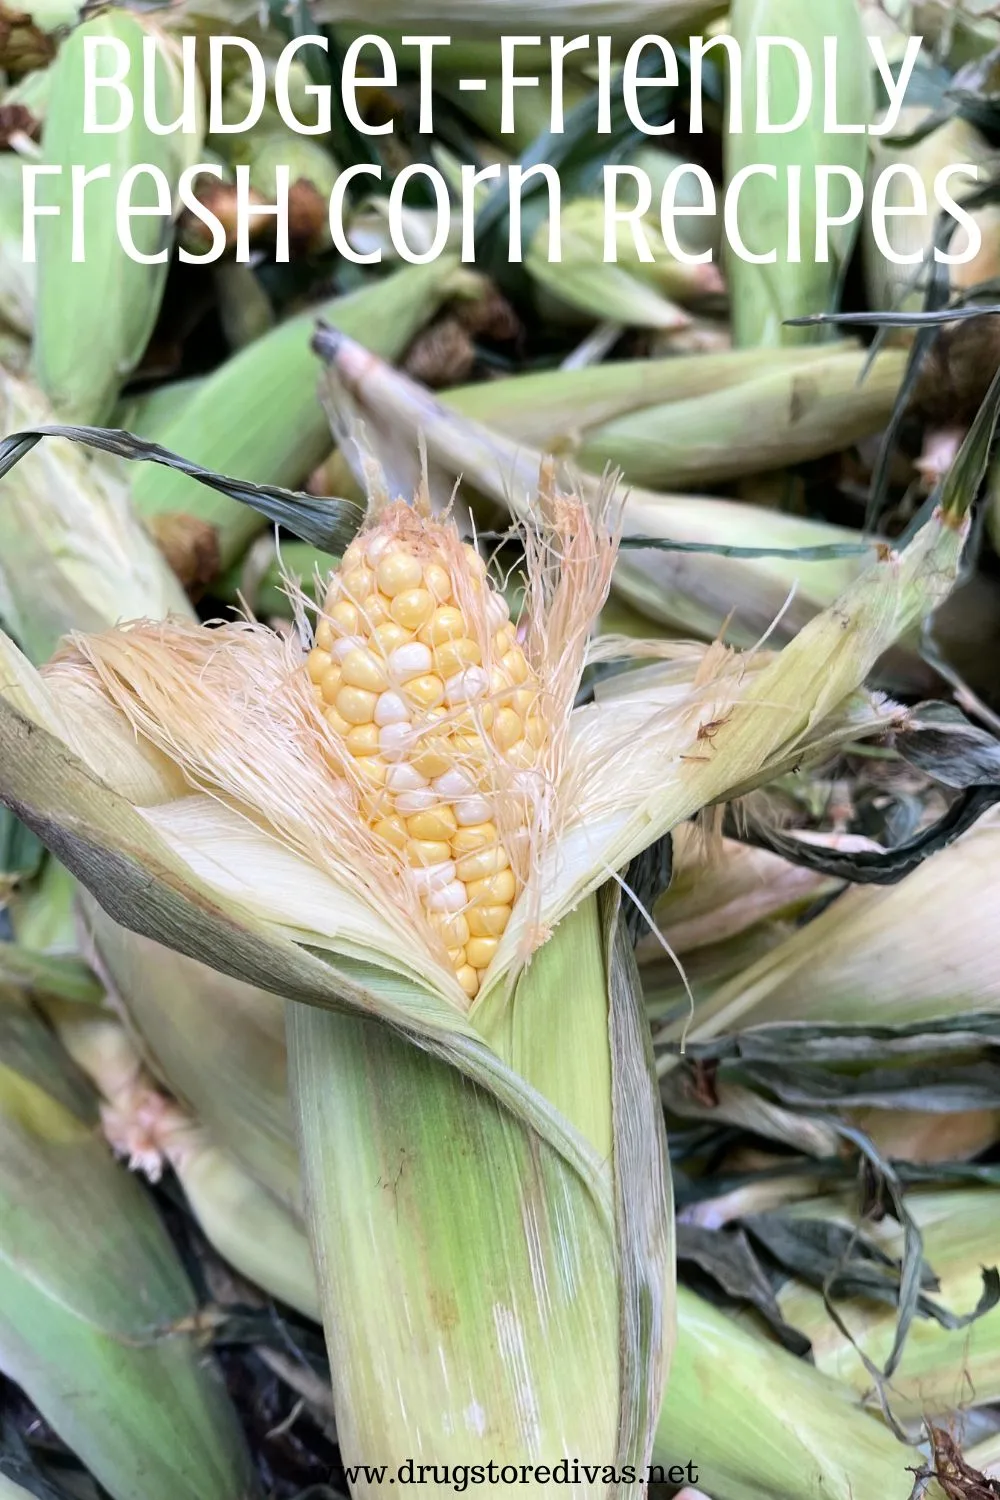 A partially shucked ear of corn with the words 